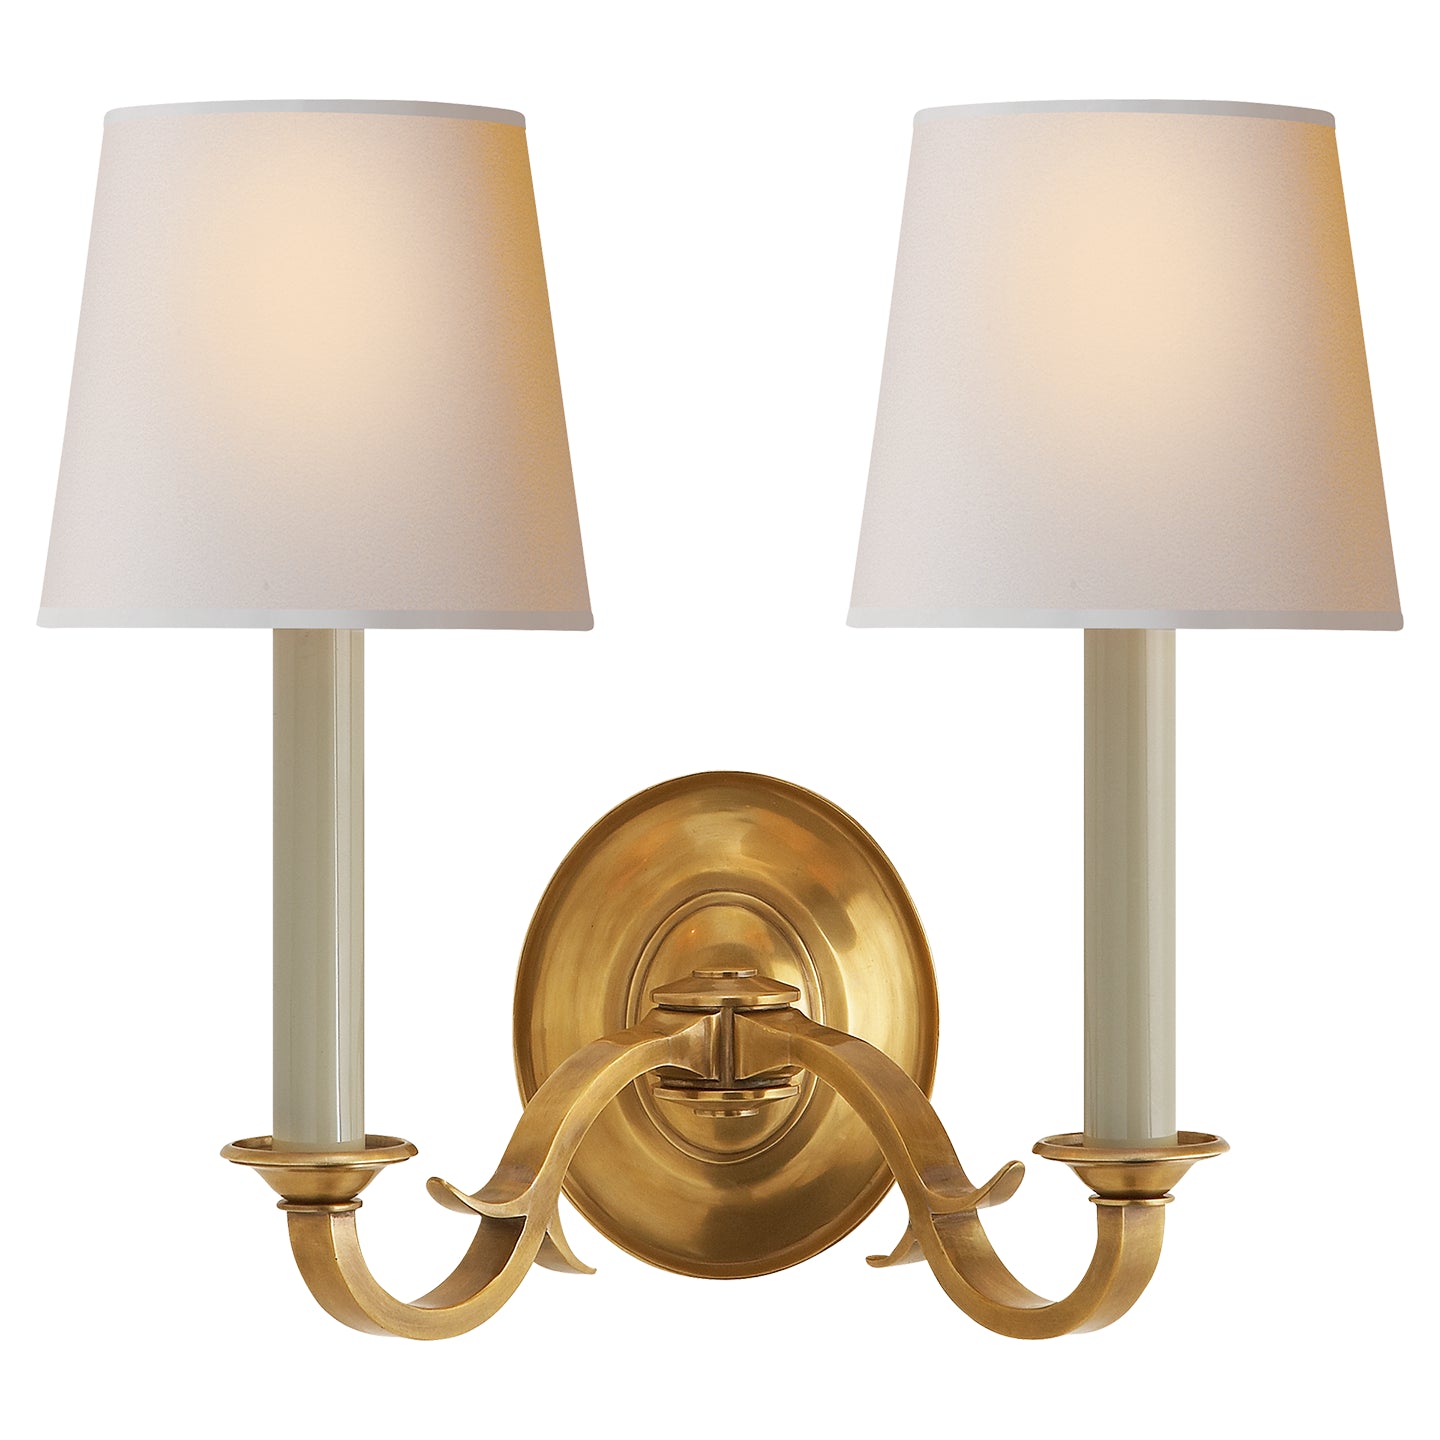 Load image into Gallery viewer, Visual Comfort Signature - TOB 2121HAB-NP - Two Light Wall Sconce - Channing - Hand-Rubbed Antique Brass
